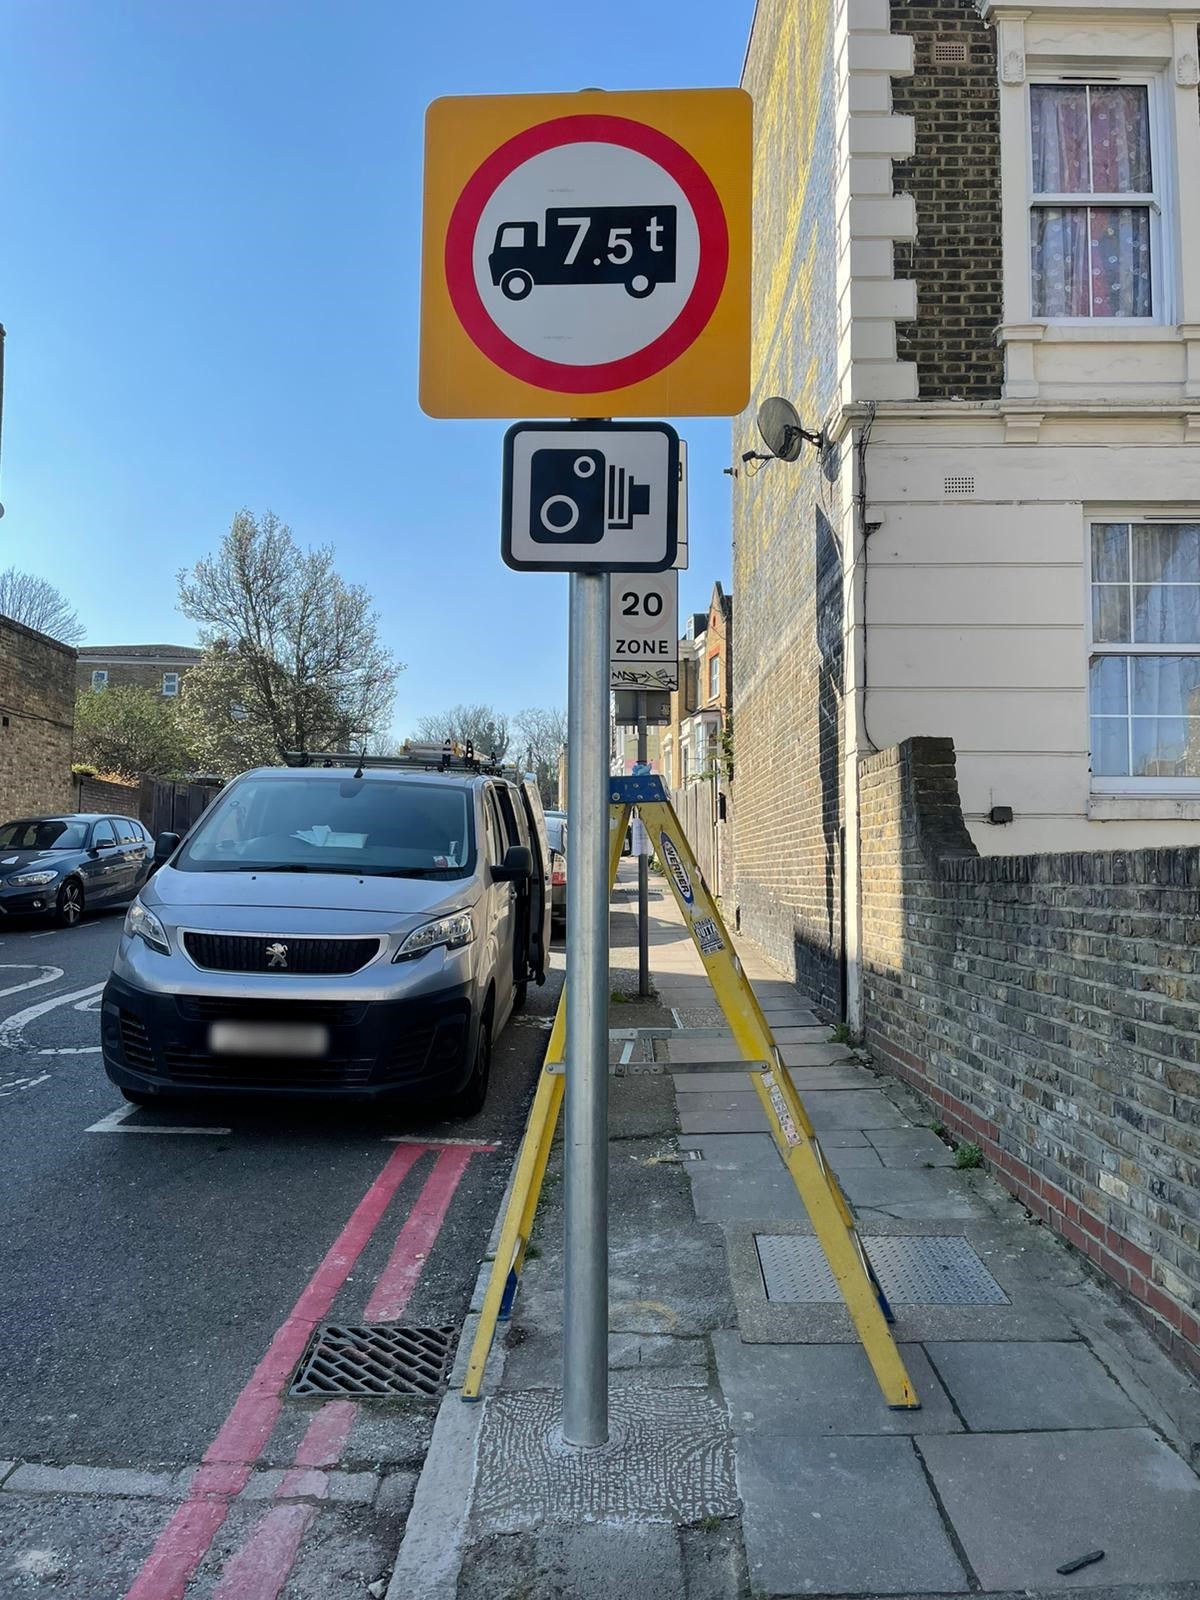 This photo shows the signage when approaching the weight restriction on Alpha Road junction with New Cross Road approaching Florence Road.